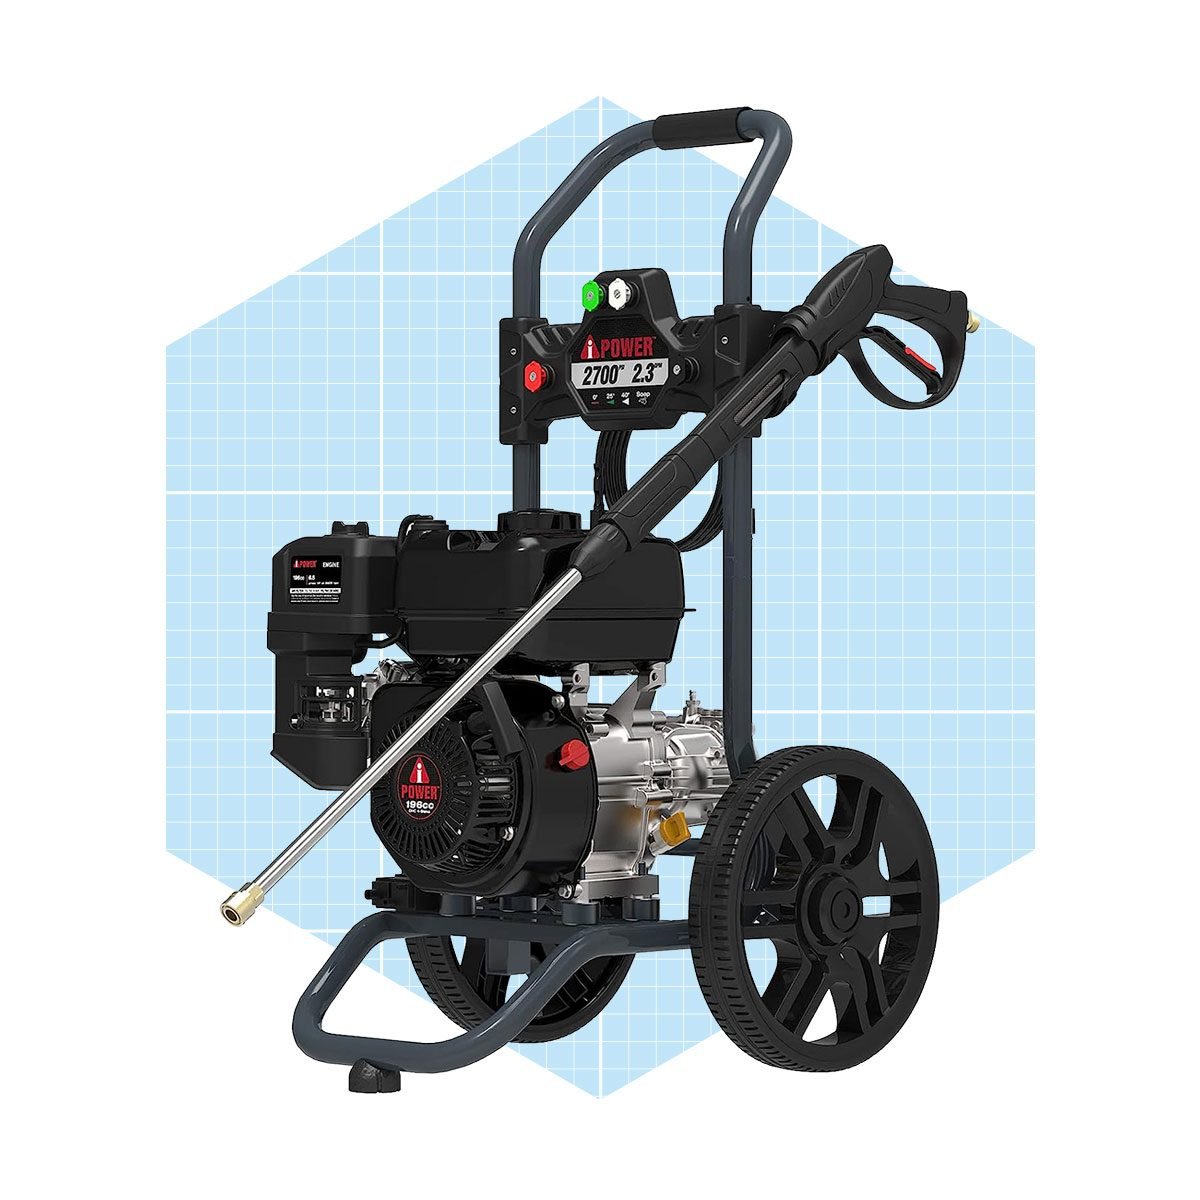 A Ipower Pwf2701sh 2700psi 2.3 Gpm Gas Powered Pressure Washer